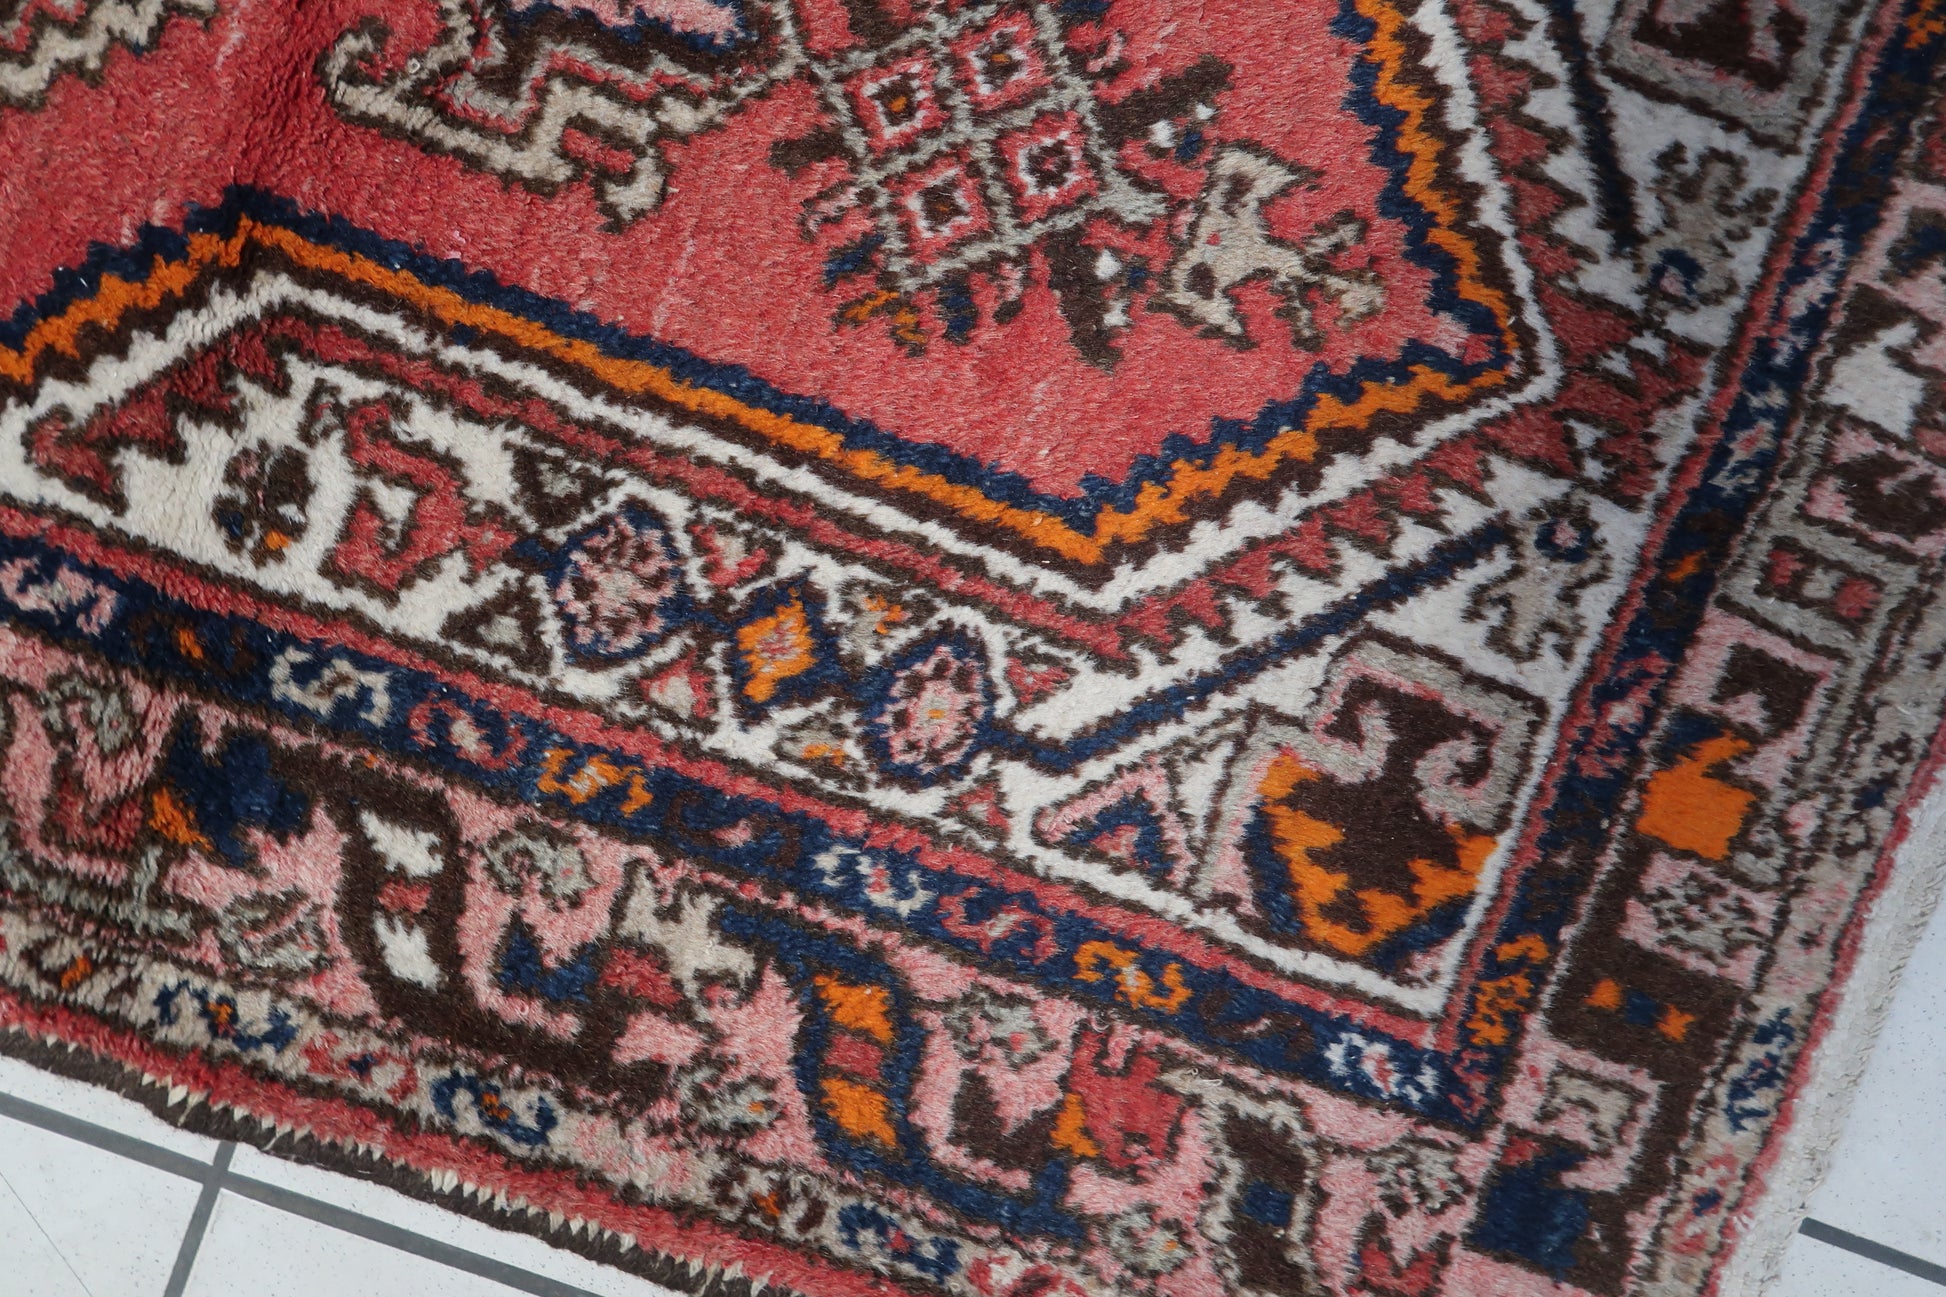 Detailed shot highlighting the intricate patterns and craftsmanship of the Persian Hamadan rug